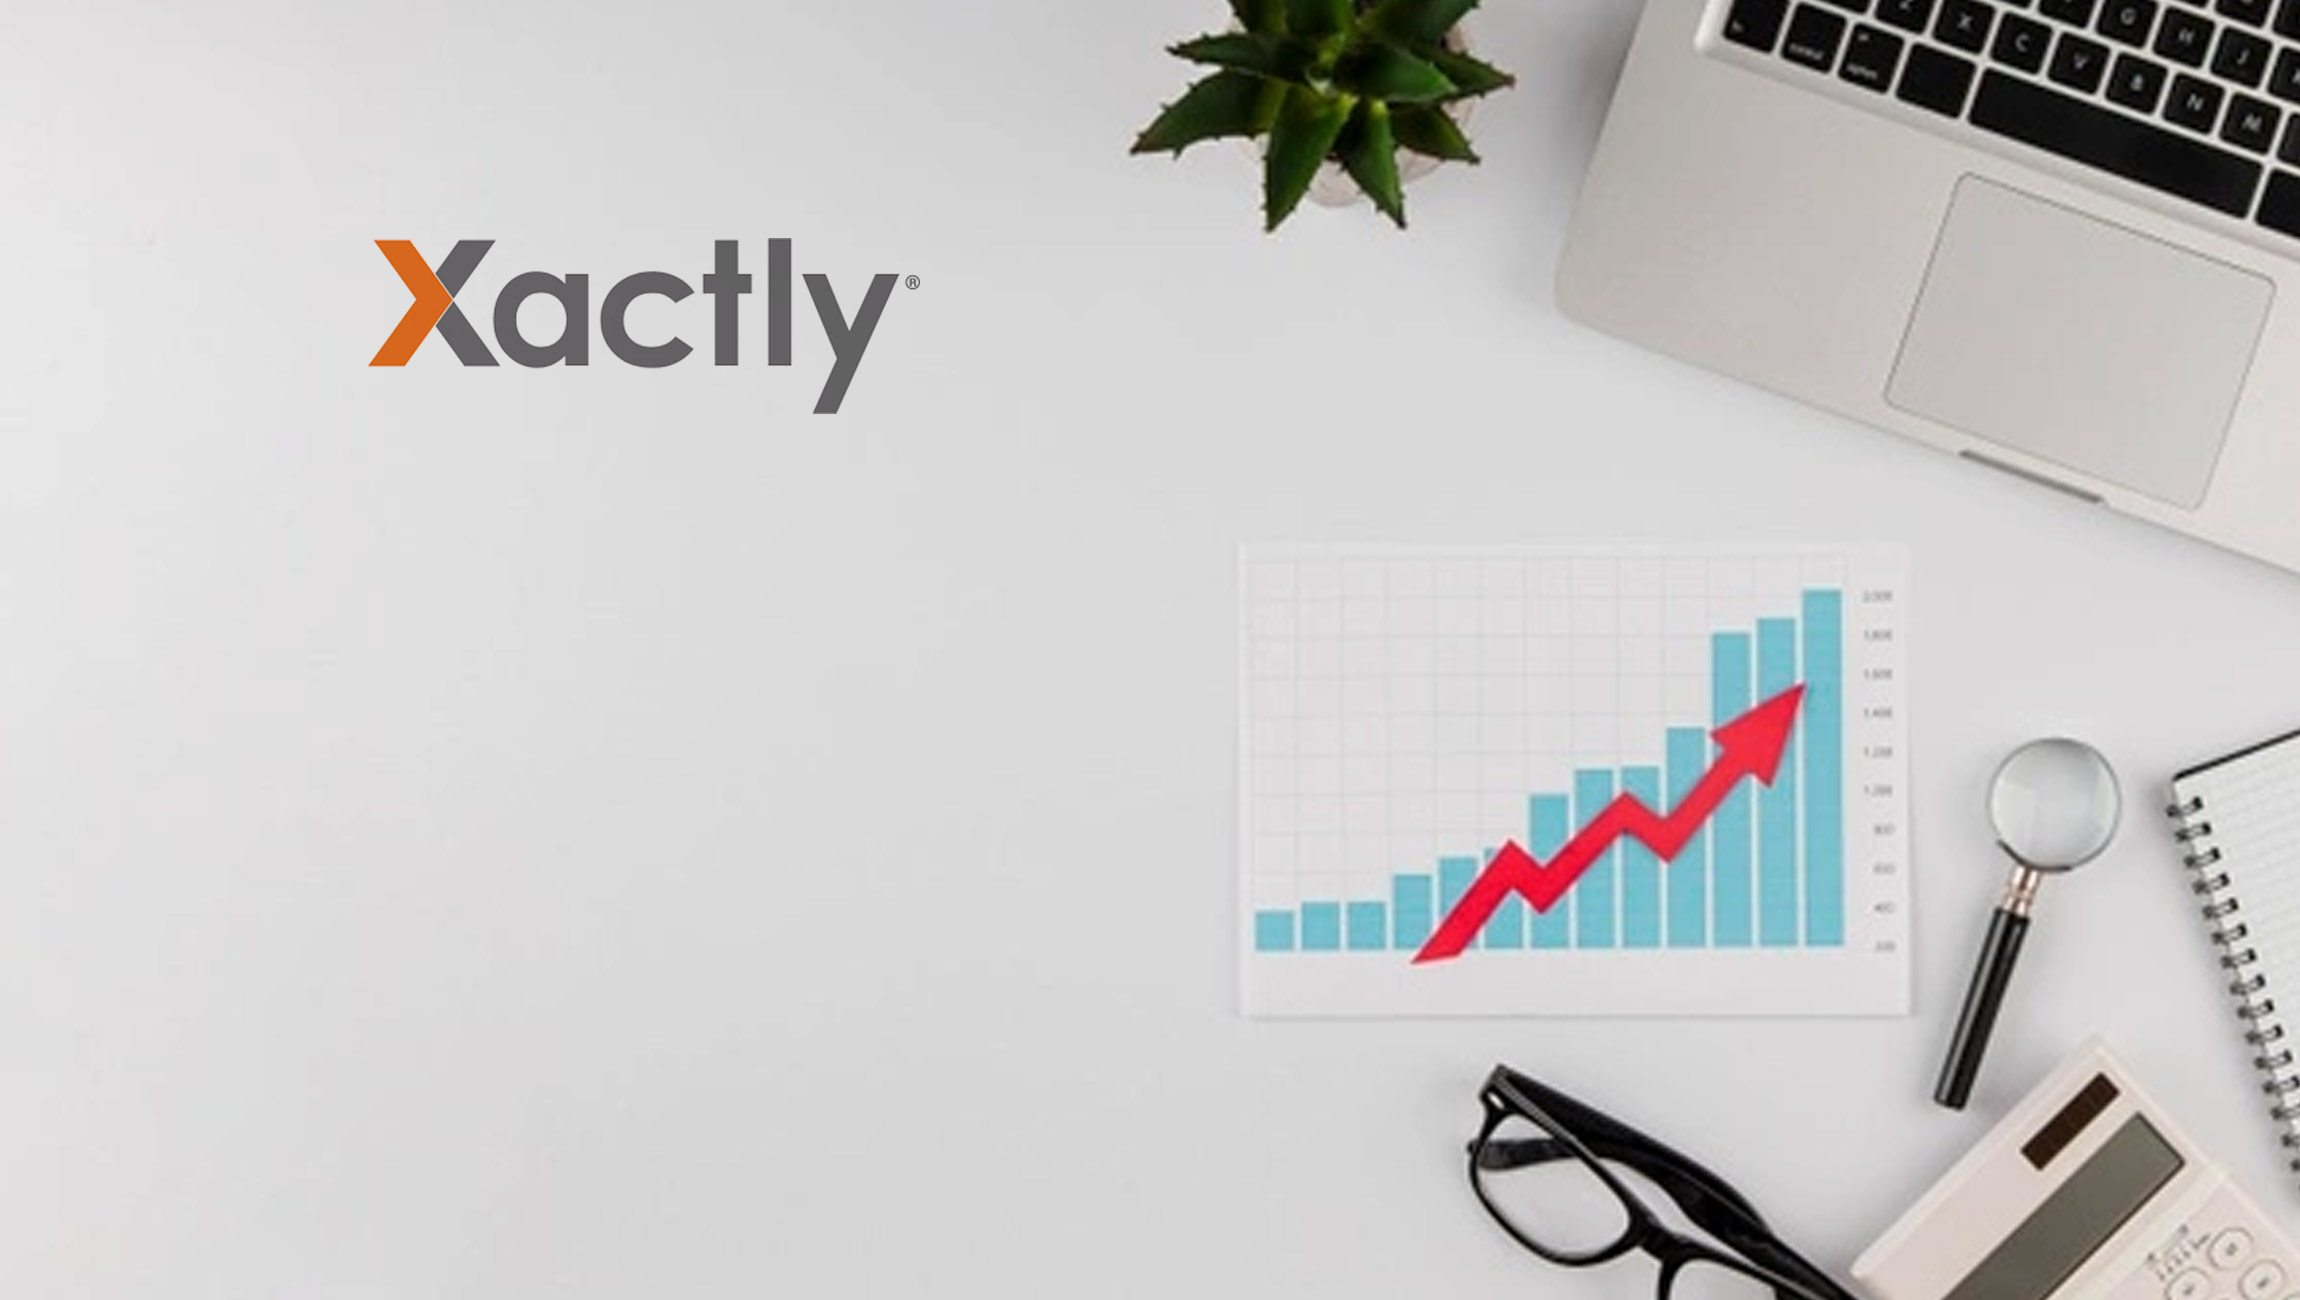 Xactly-Achieves-Strongest-Quarter-in-Company-History_-Grows-Bookings-by-92%